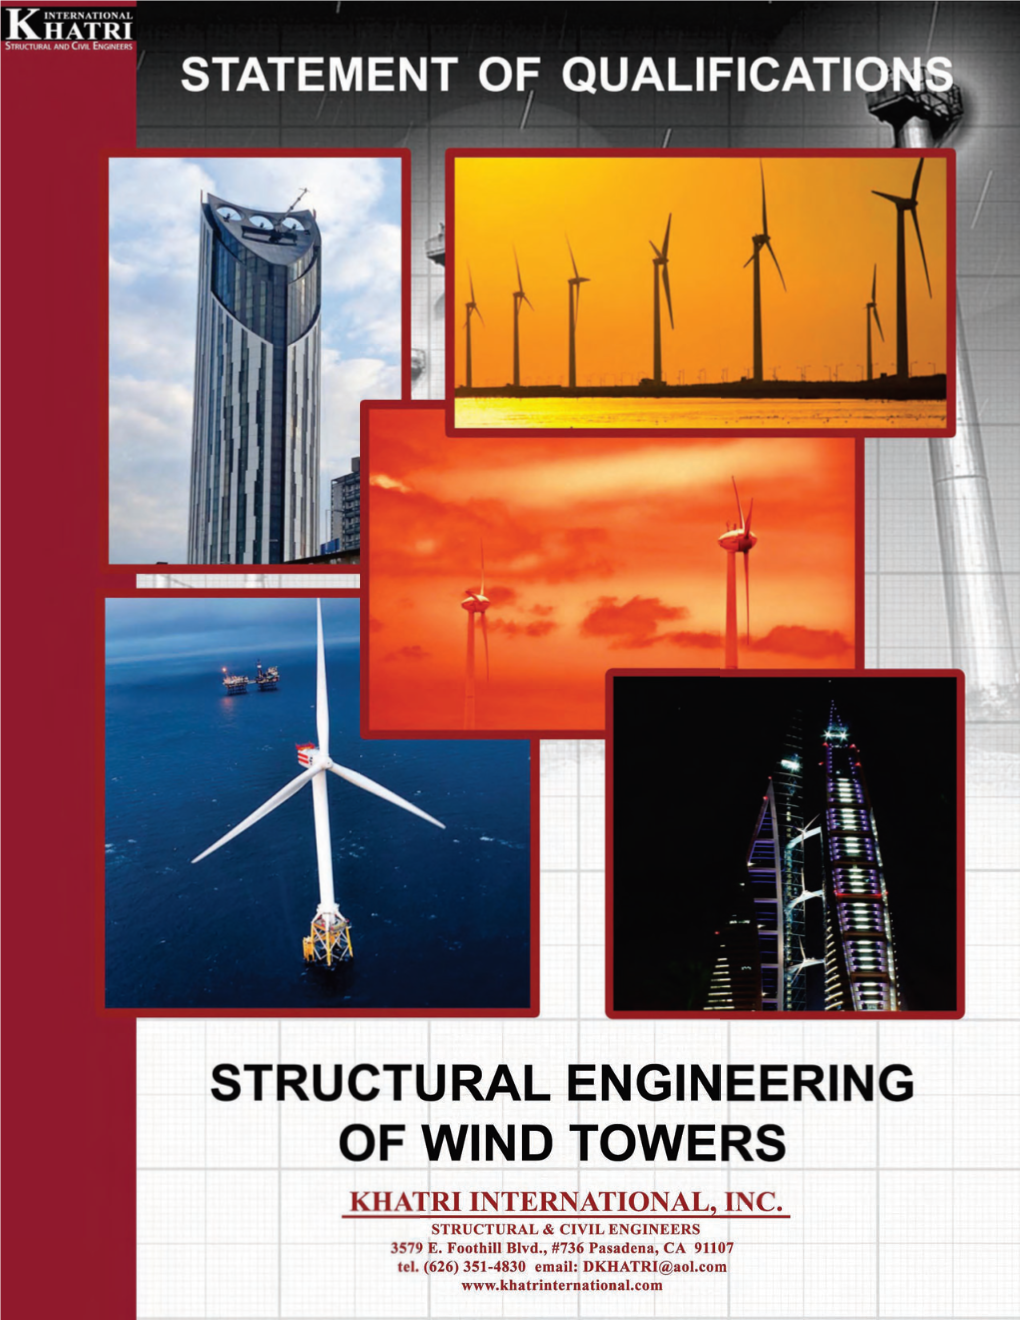 Structural Engineering of Wind Towers International Hatri Structuralk and Civil Engineers